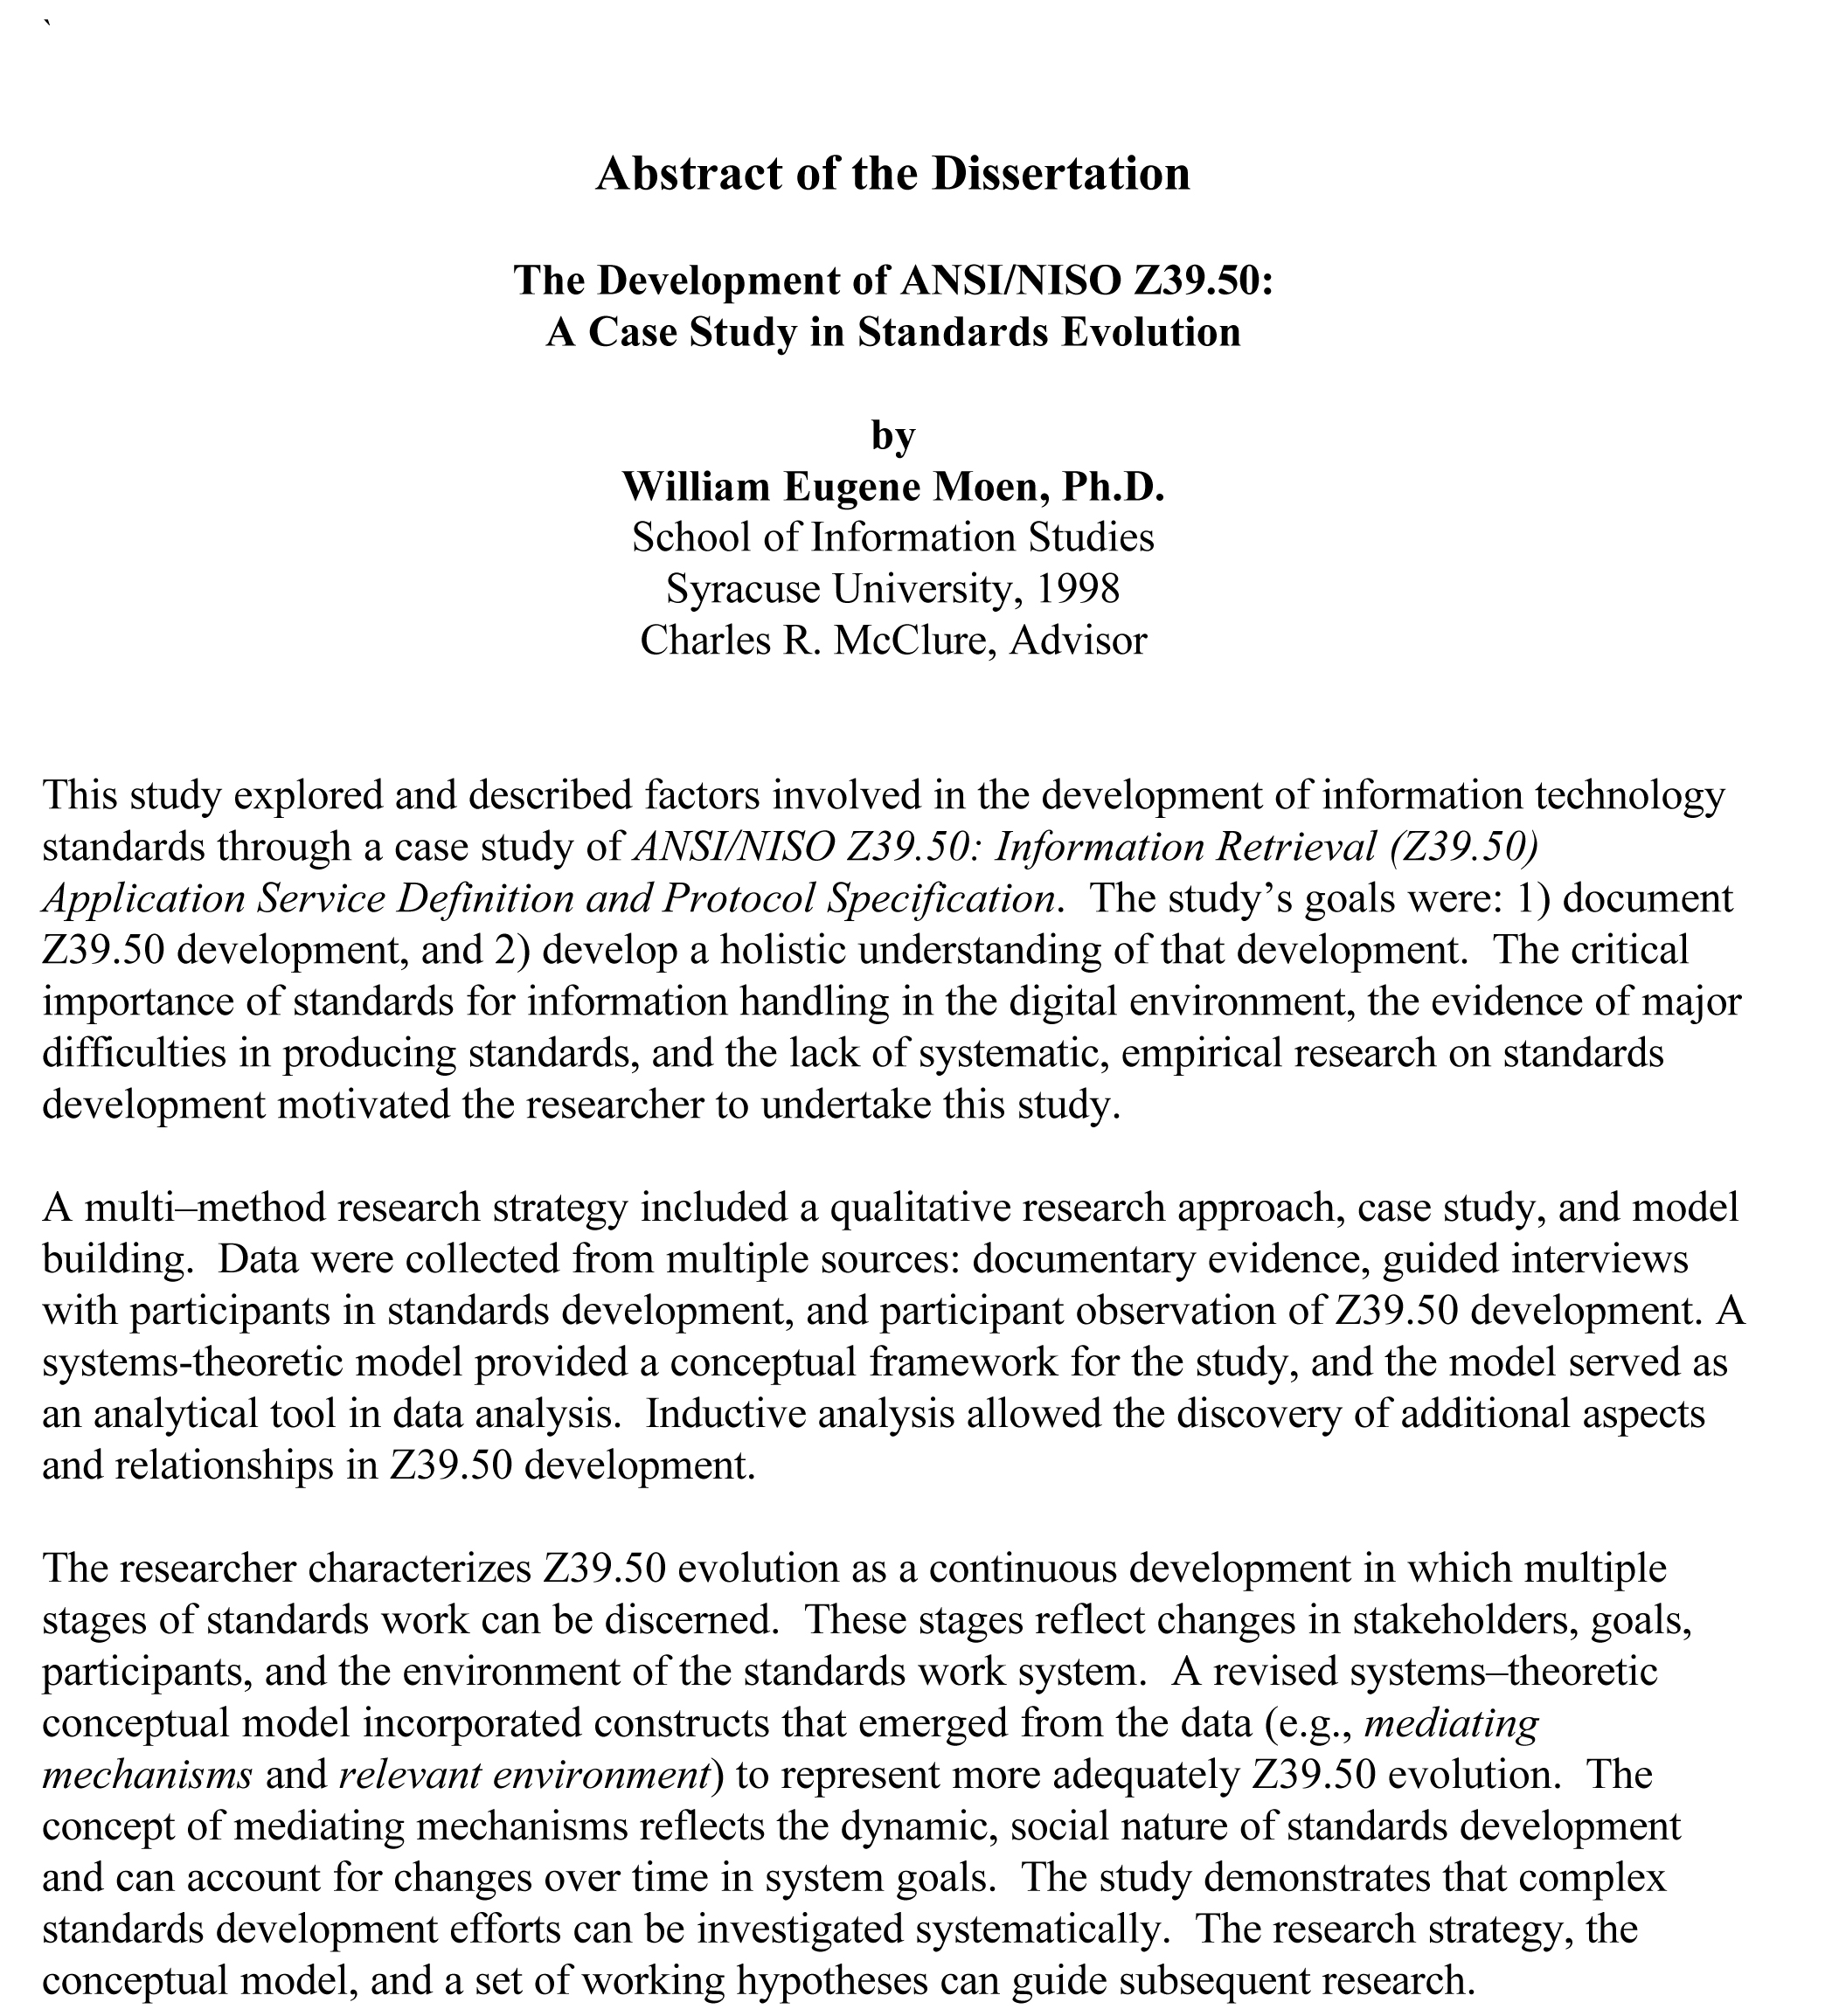 Dissertation abstracts online 57